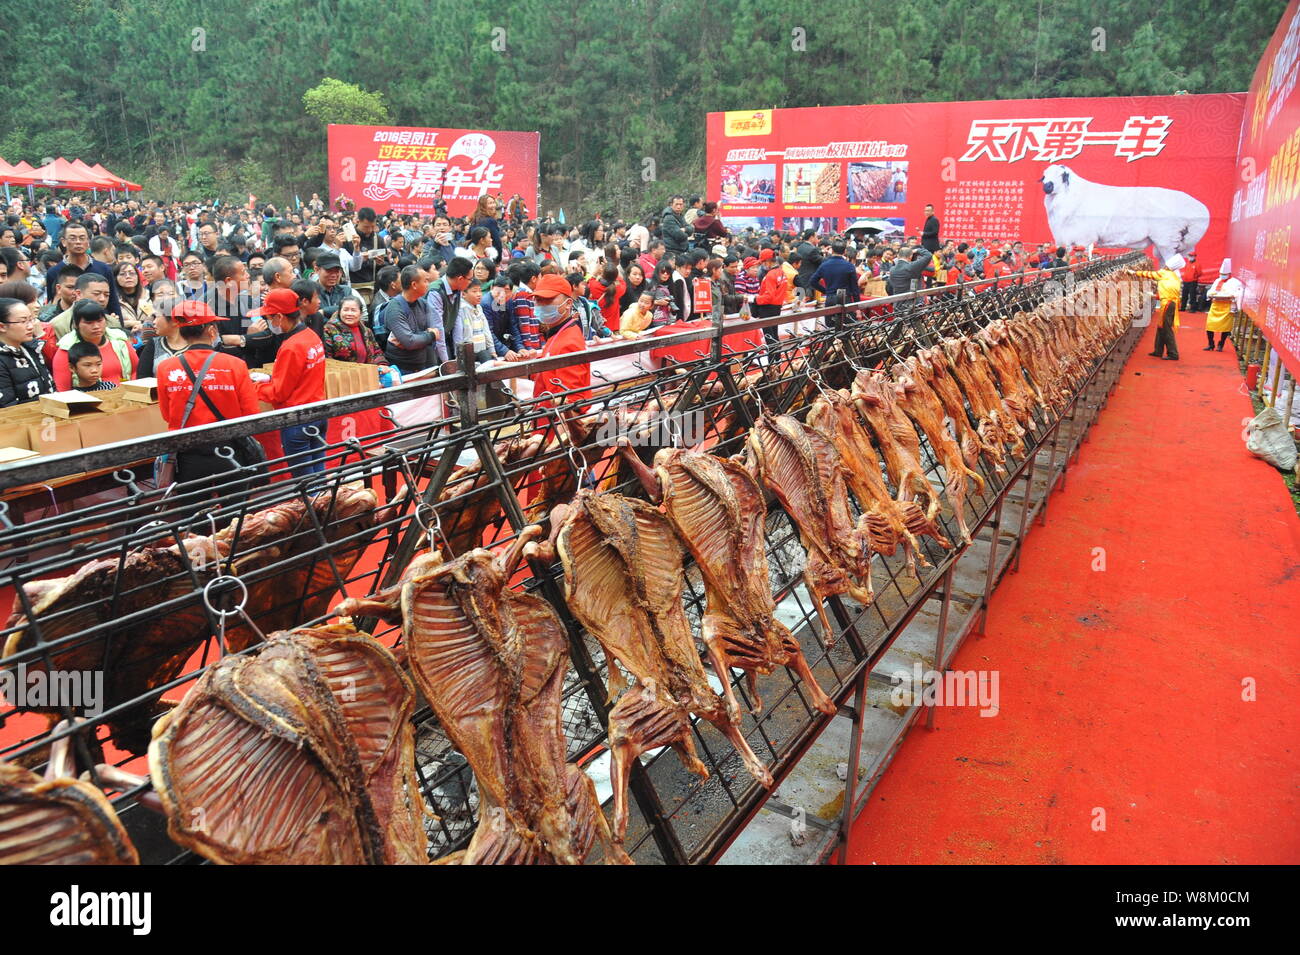 Chinese cook Jiang Linsheng spit-roasts 216 lambs simultaneously at a park in Nanning city, south China's Guangxi Zhuang Autonomous Region, 20 Februar Stock Photo